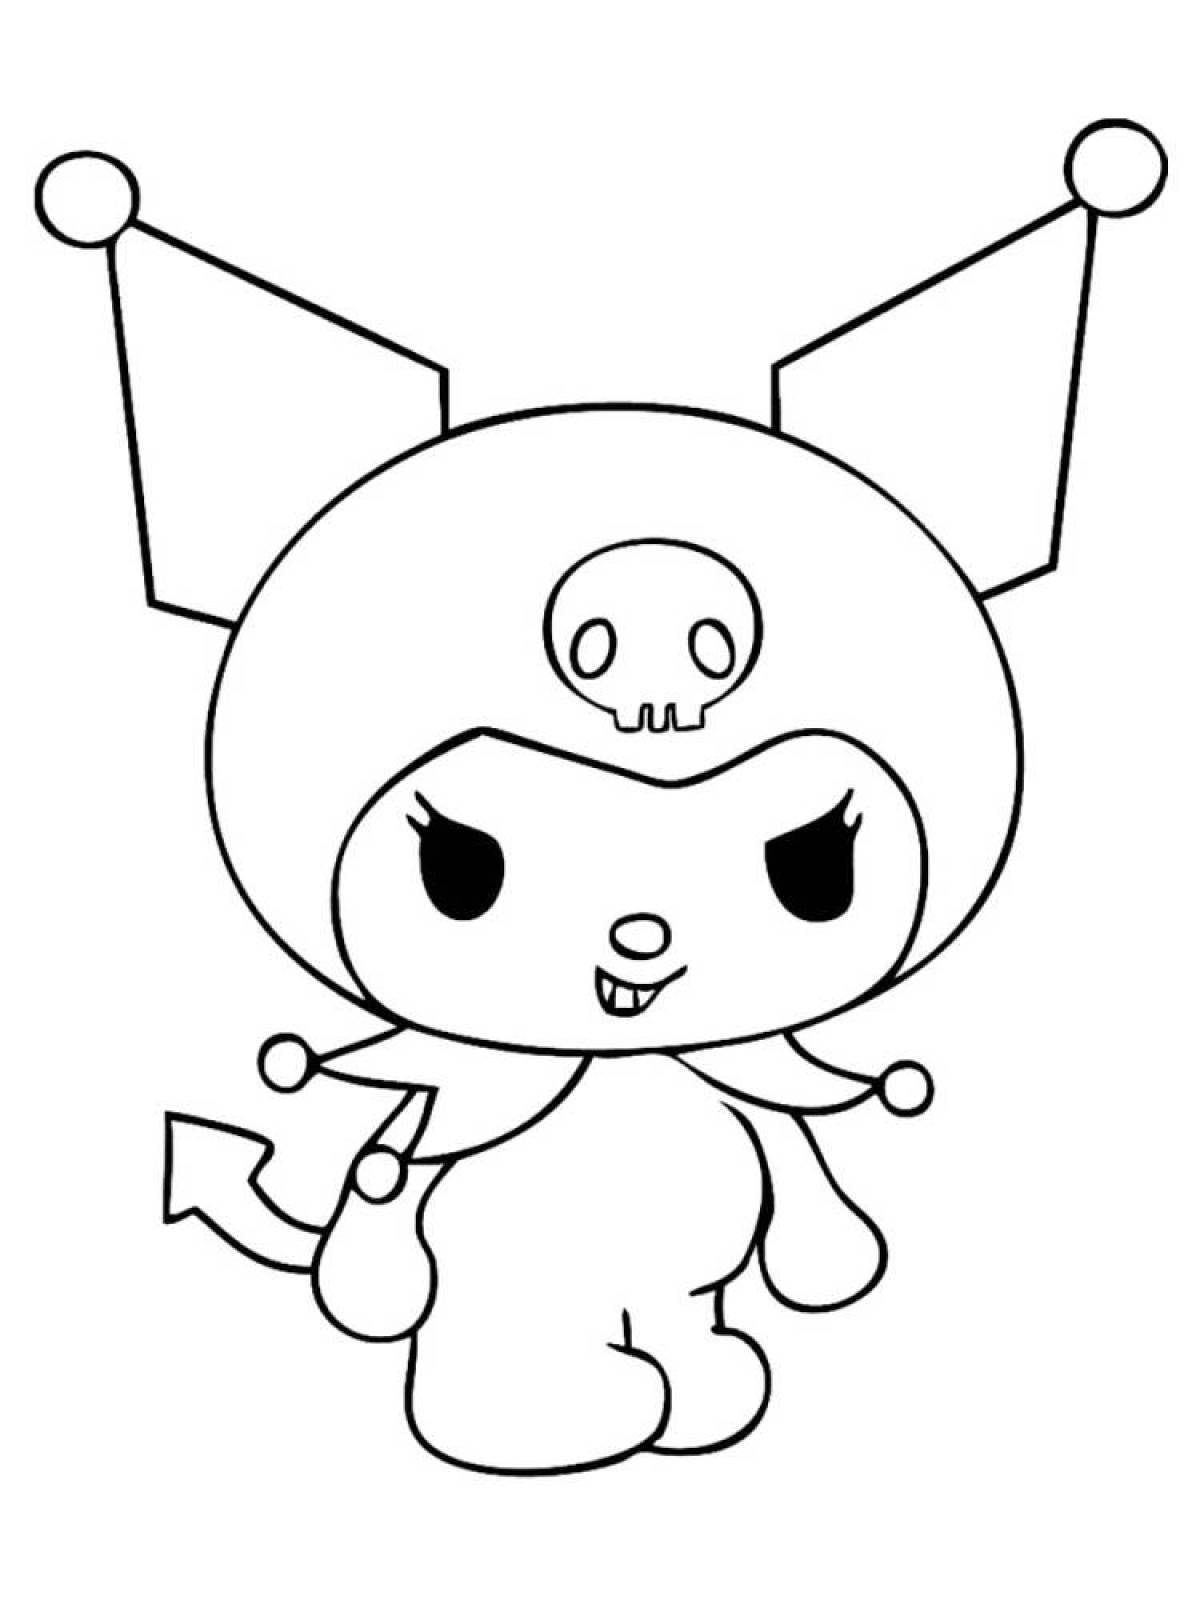 Kuromi and Mai Melody's adorable coloring page